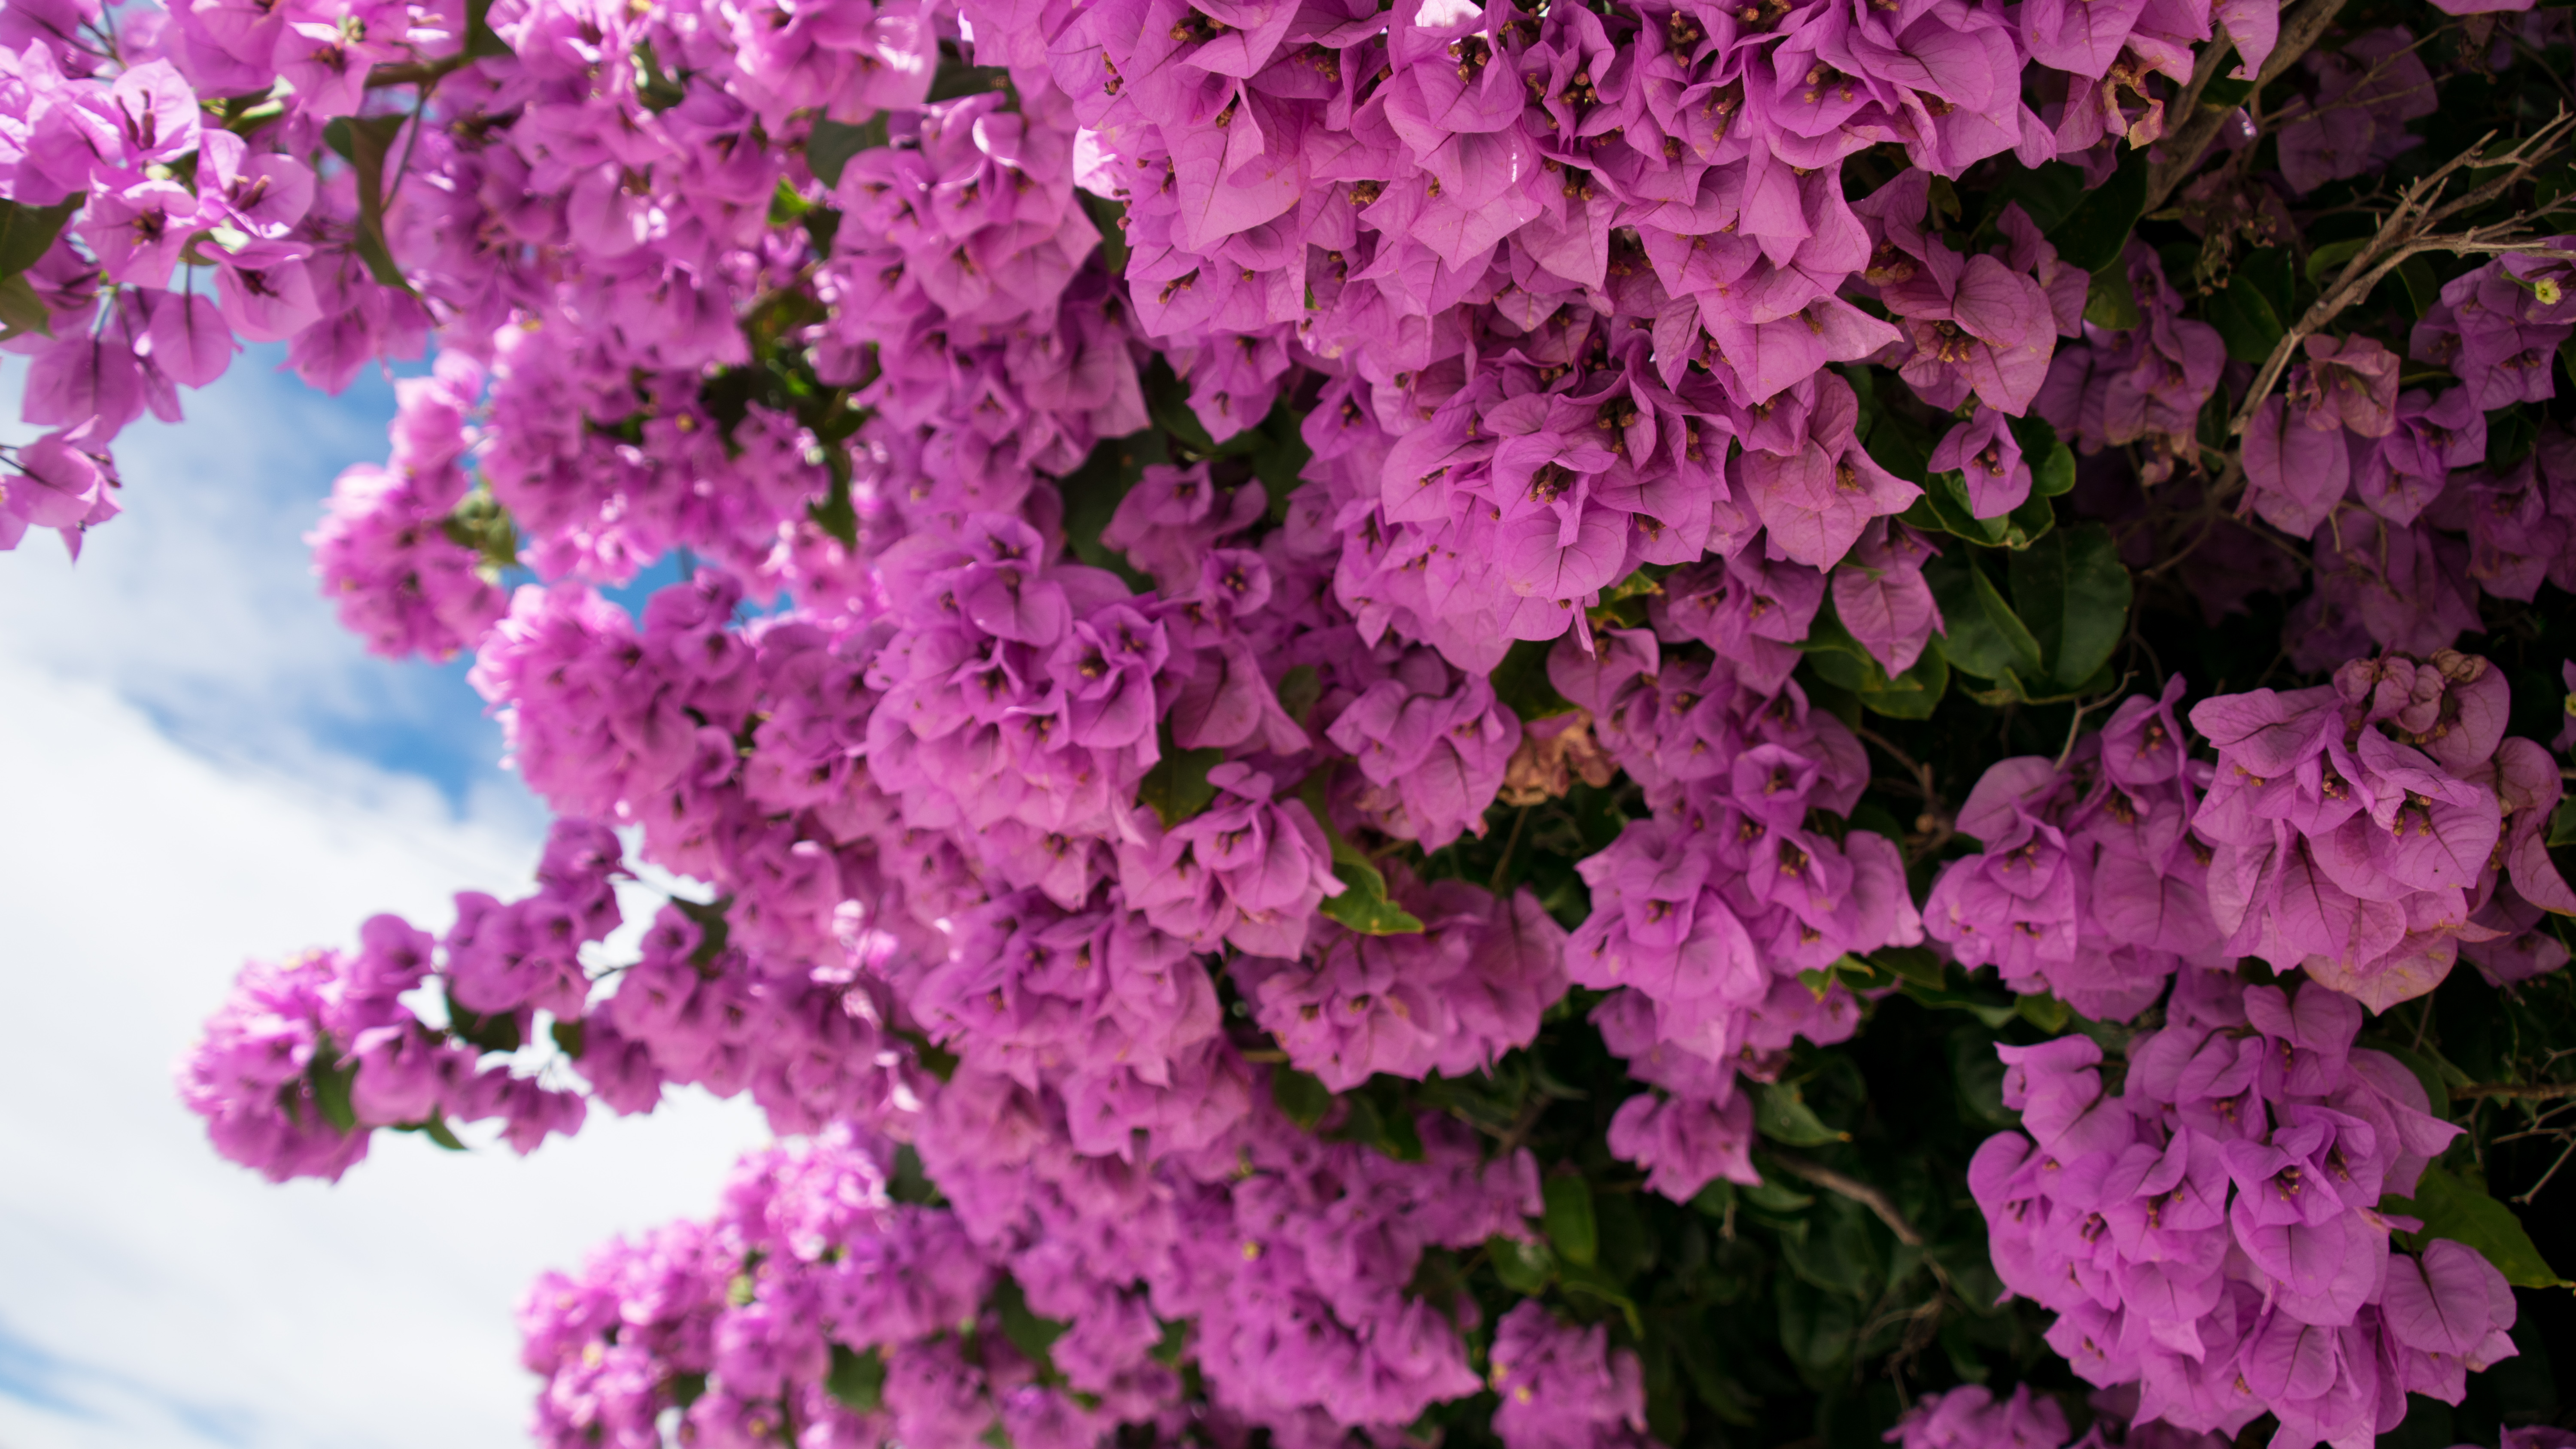 General 6000x3375 flowers pink nature bougainvillea